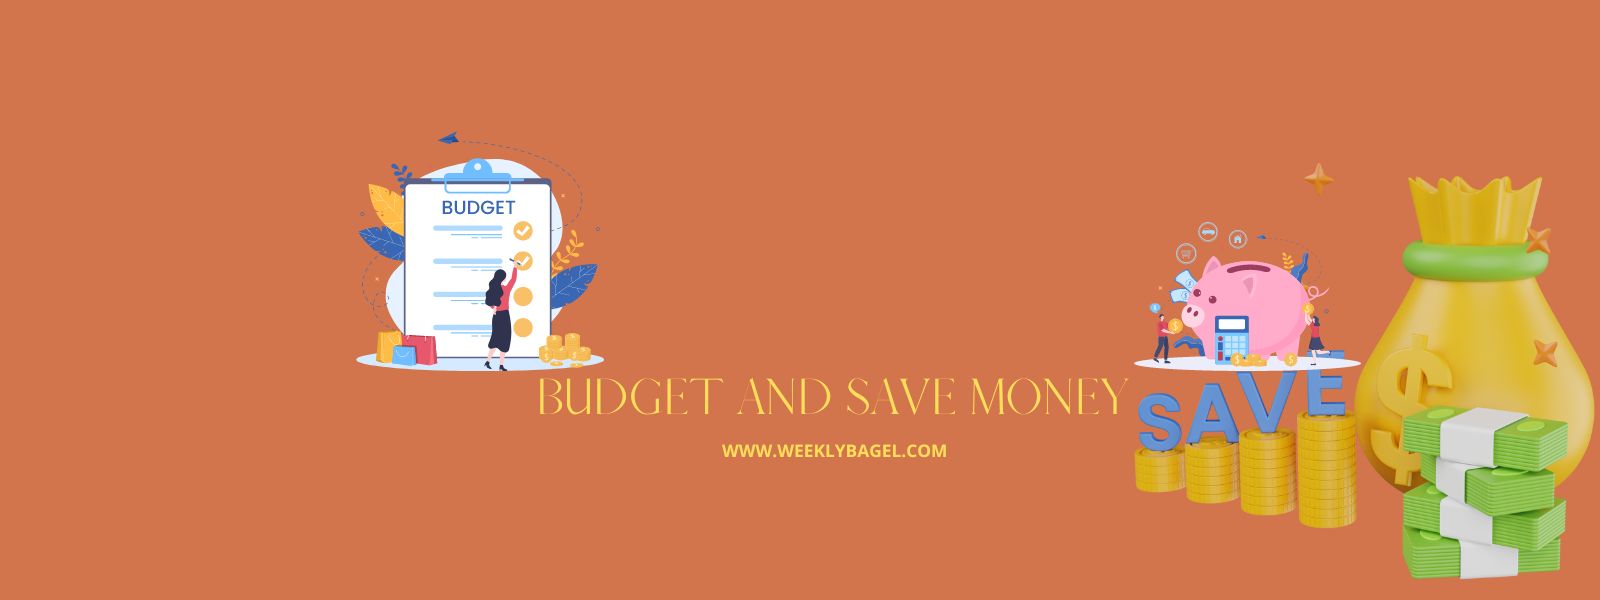 Budget and Save Money